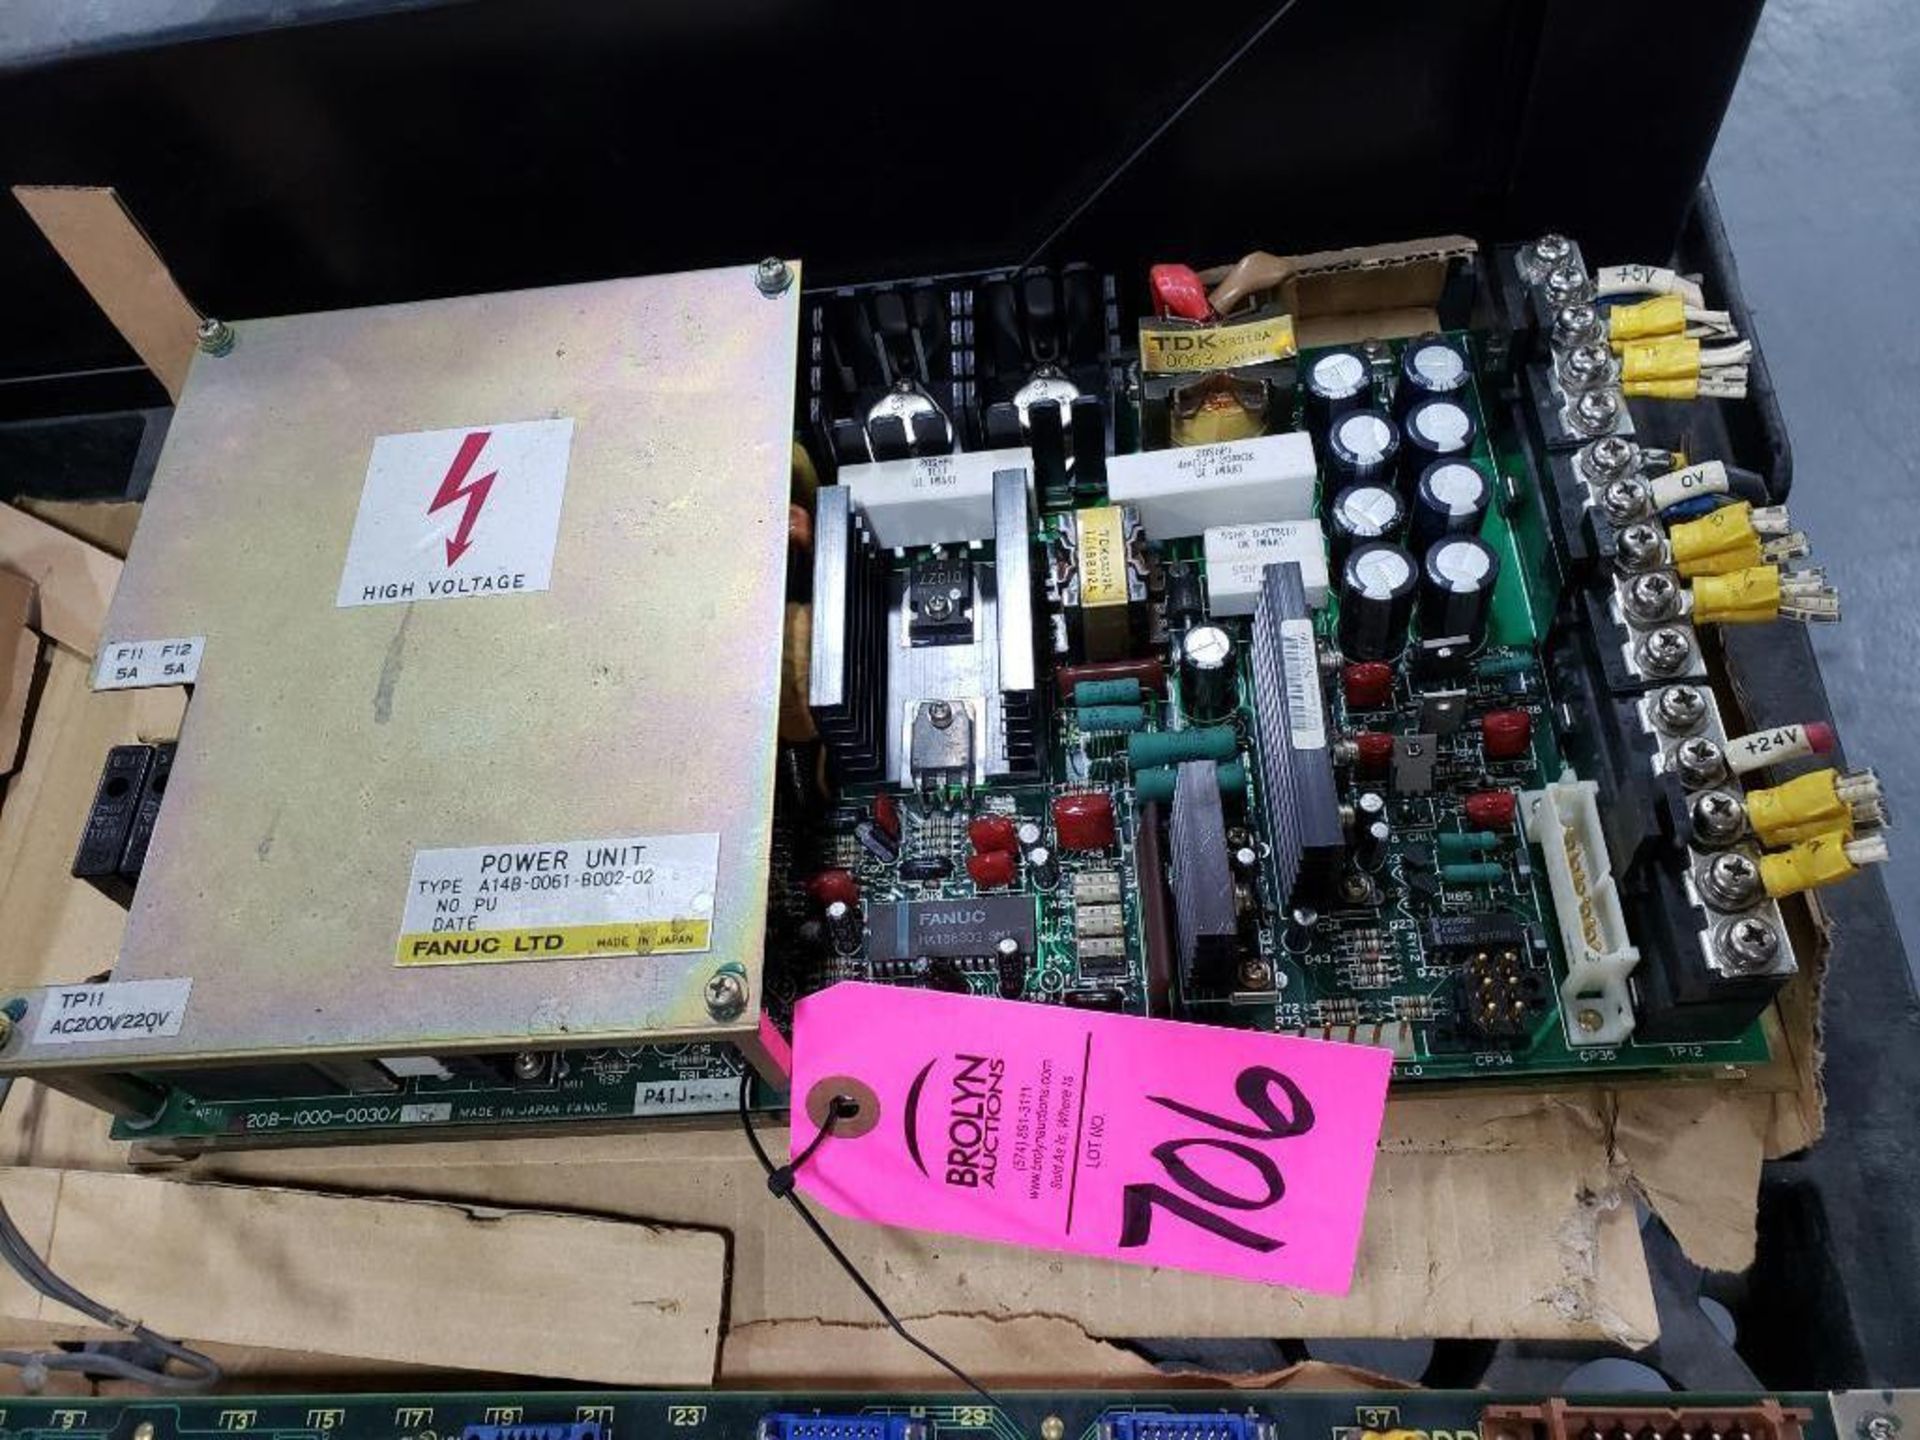 Fanuc power supply unit model A14B-0061-B002-02. Pulled from working machine.